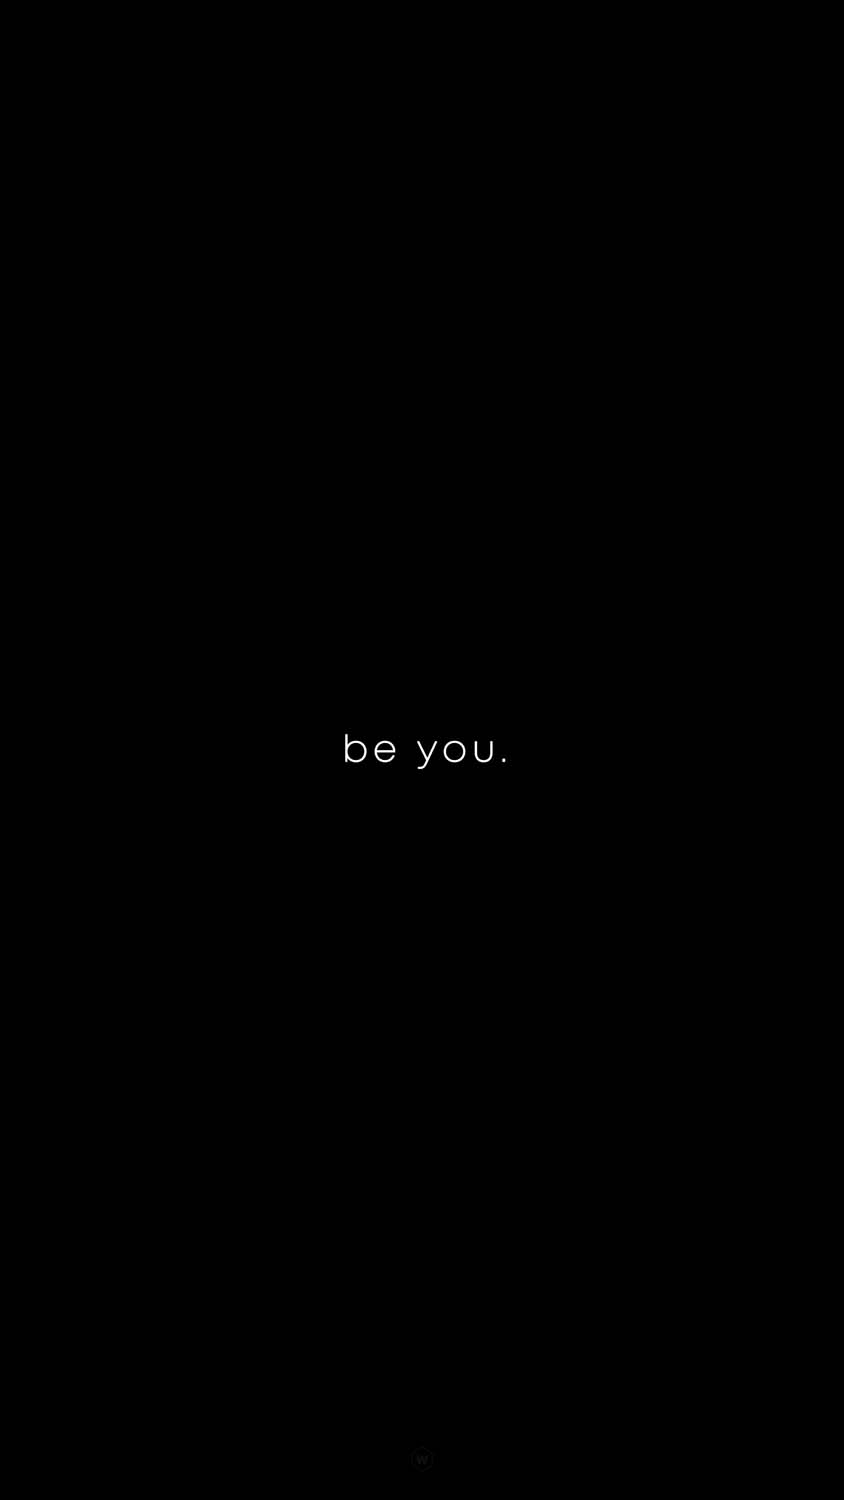 Be You iPhone Wallpaper HD - iPhone Wallpapers